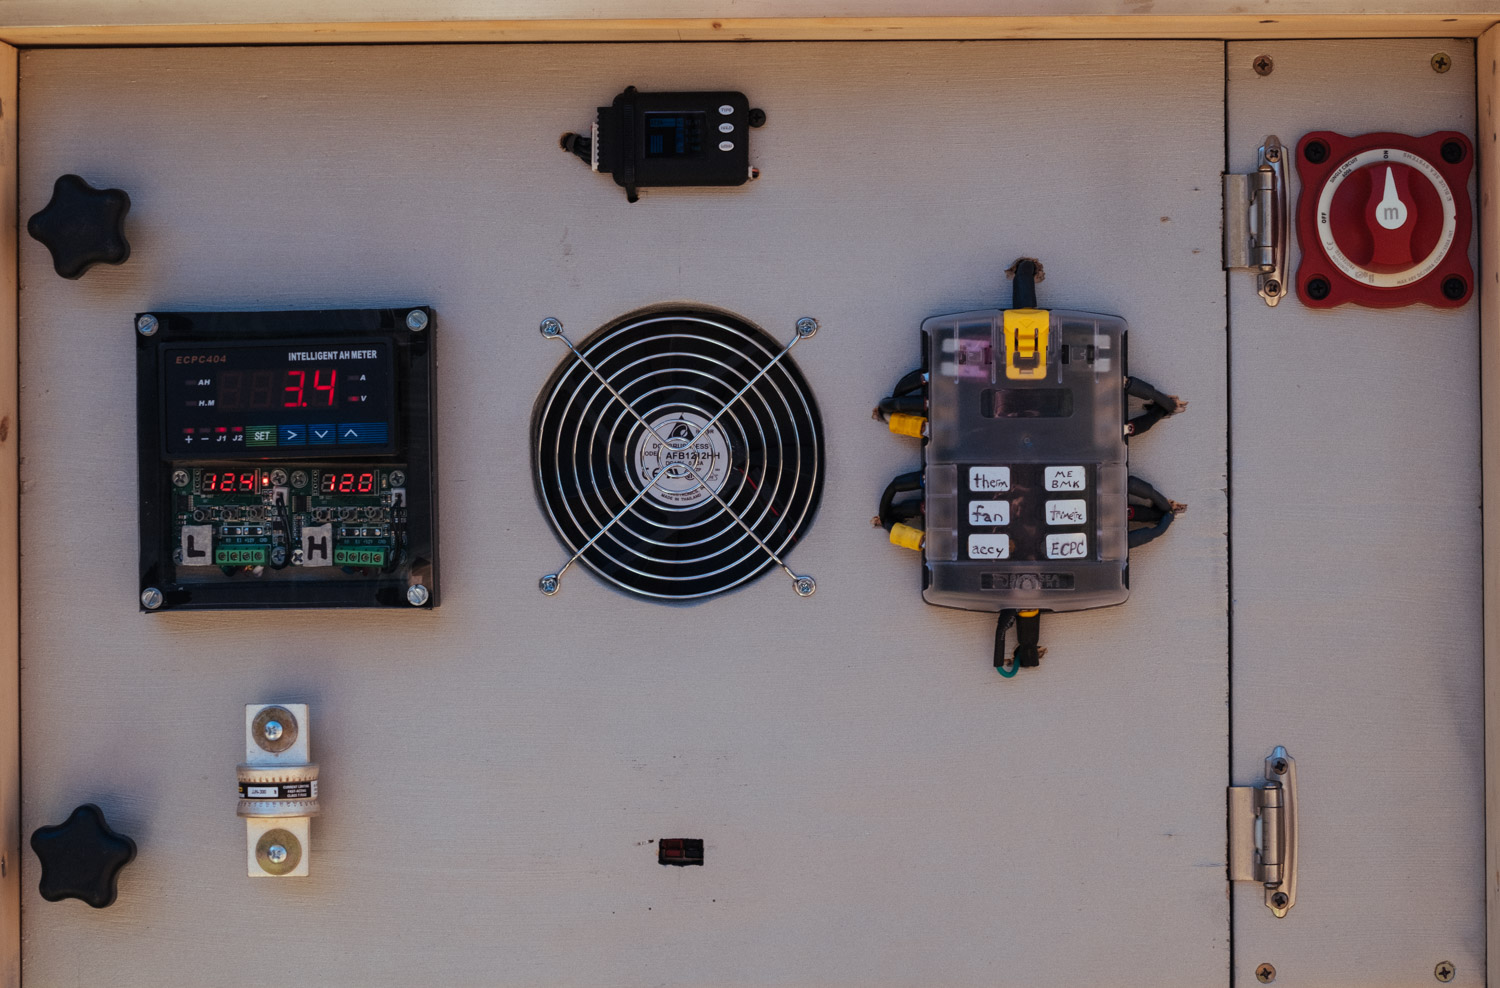  This is the front view of the updated "BMS panel" with (left to right): relay controller, thermostats, cell voltage monitor, cooling fan, fuse block, and battery disconnect switch. The spare fuse doubles as a handle. 